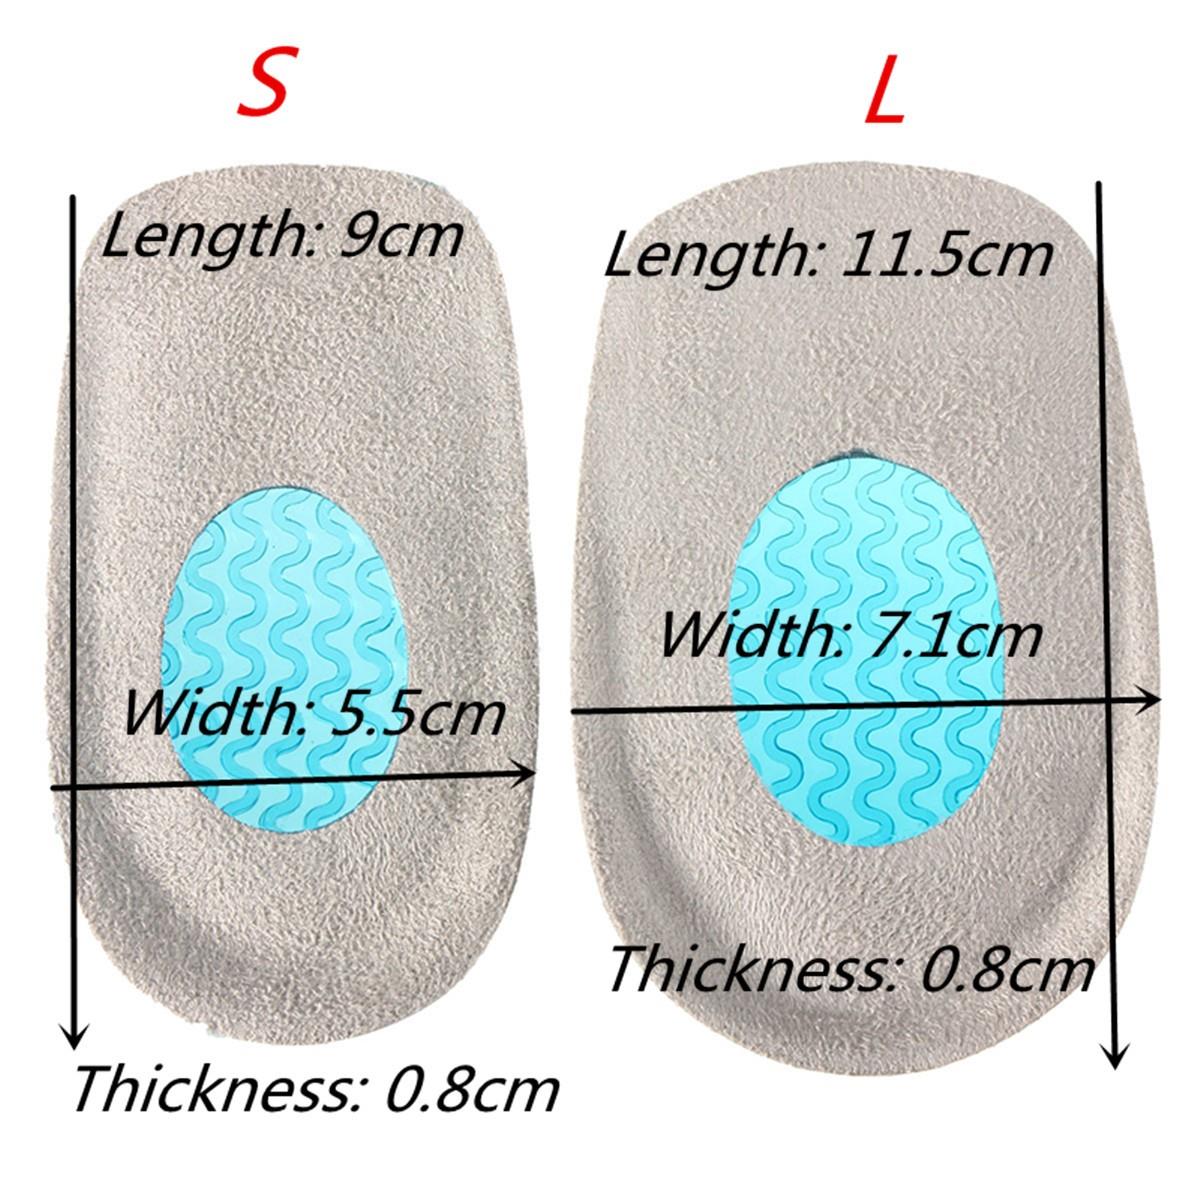 BSAID Heel Inserts Cushion Silicone Shoe Insoles Women Men Foot Pads Silicon Gel Insoles for Spur Plantar Fasciitis Foot Protect